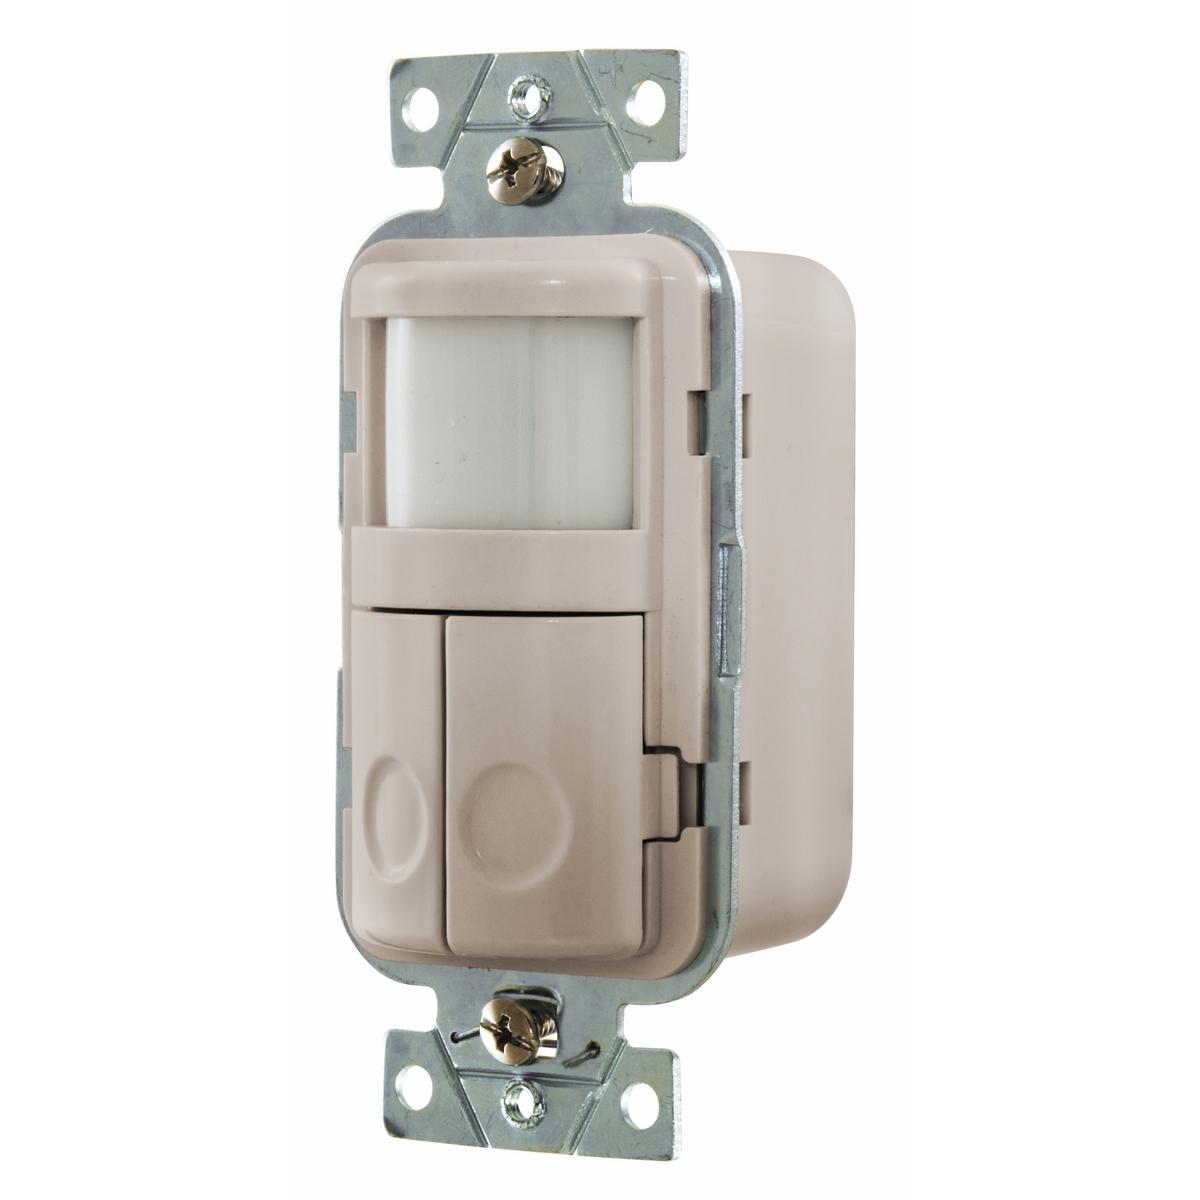 Hubbell WS1020LA Occupancy Sensors, Passive Infrared, 2Circuit, 120V AC, Light Almond  ; No Neutral ; 